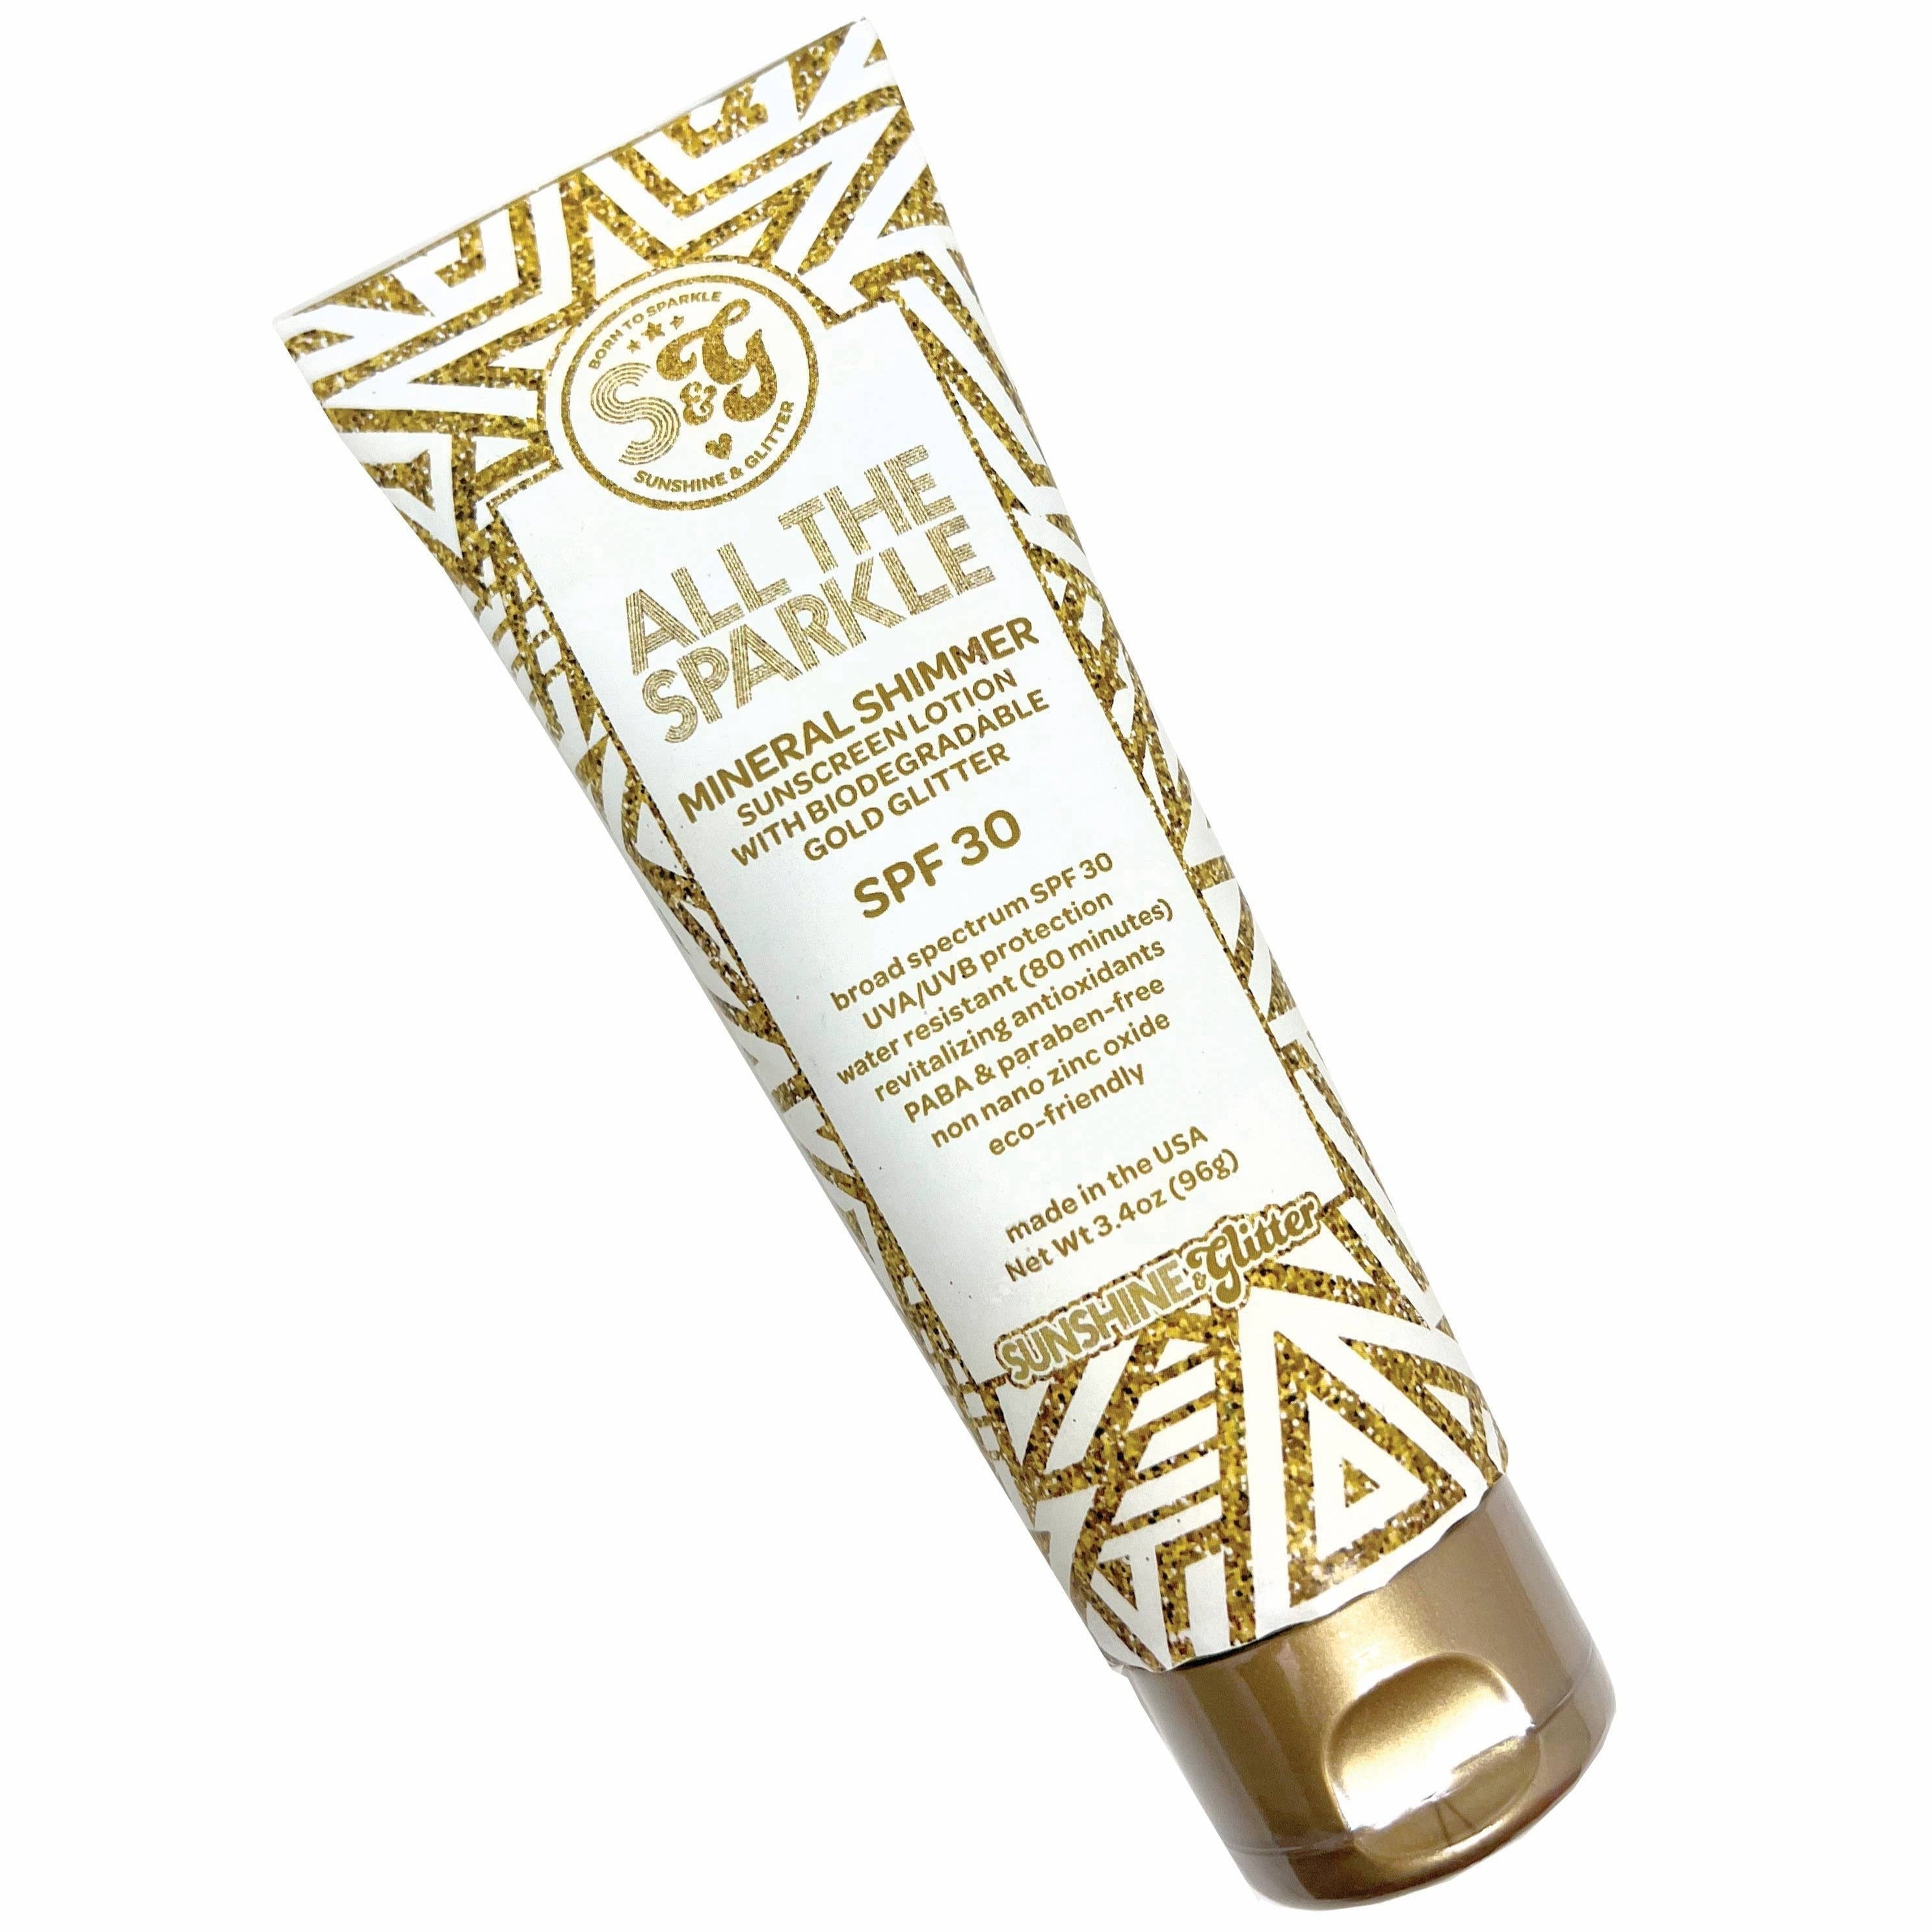 All The Sparkle Mineral Shimmer Sunscreen Lotion